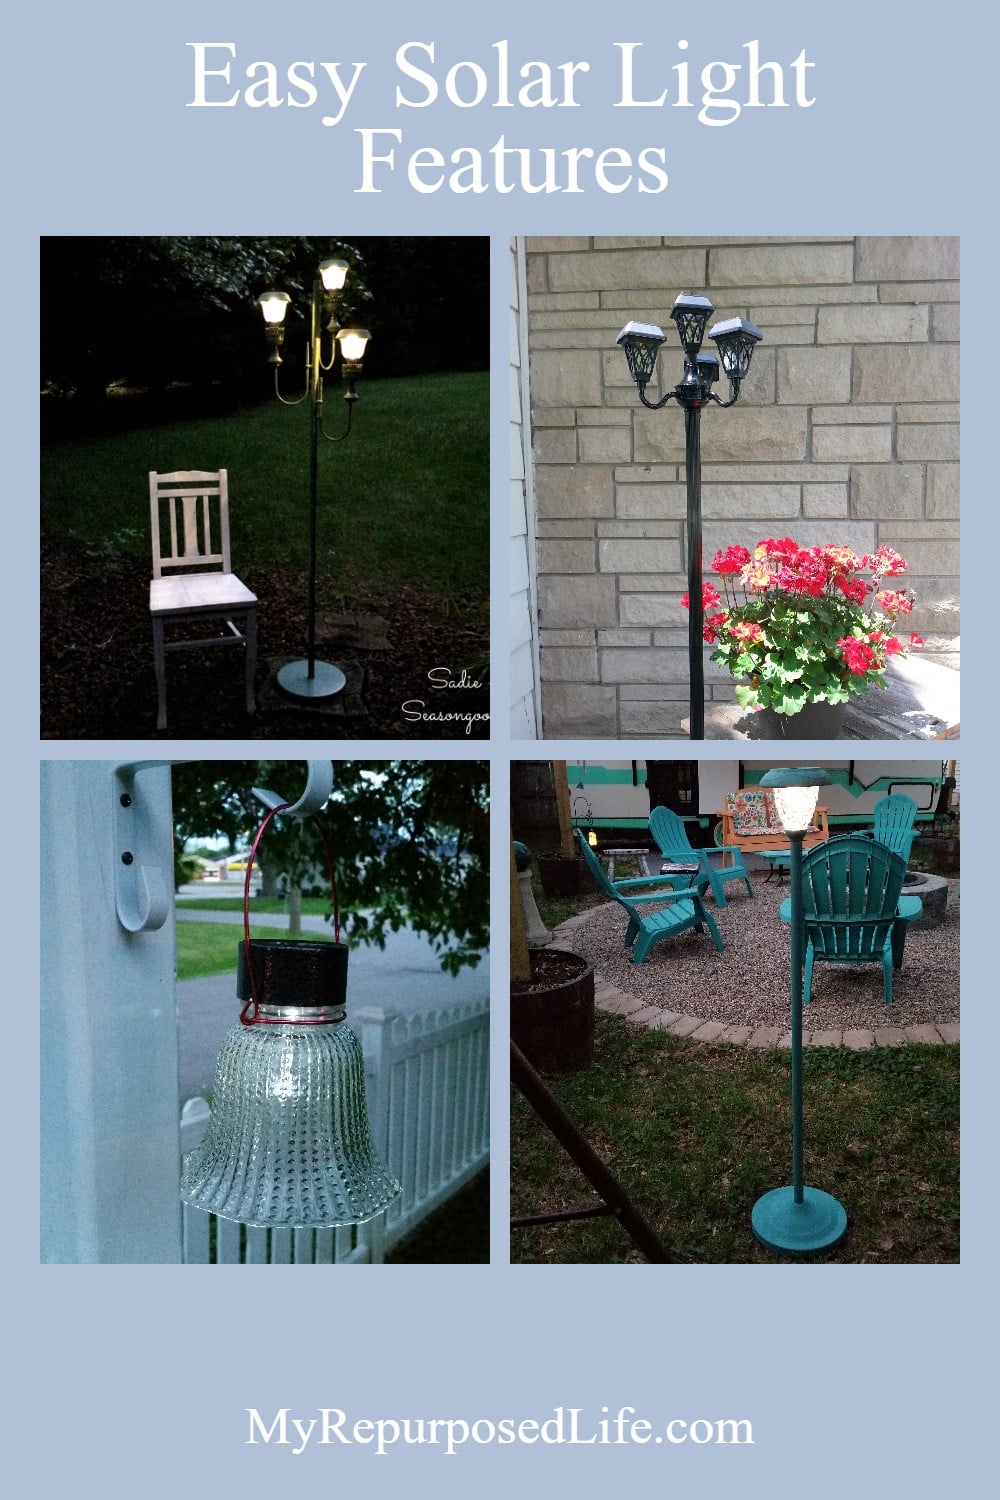 A collection of solar light features including upcycled lamps, chandeliers and more. Easy afternoon projects to light up your outdoor space. via @repurposedlife